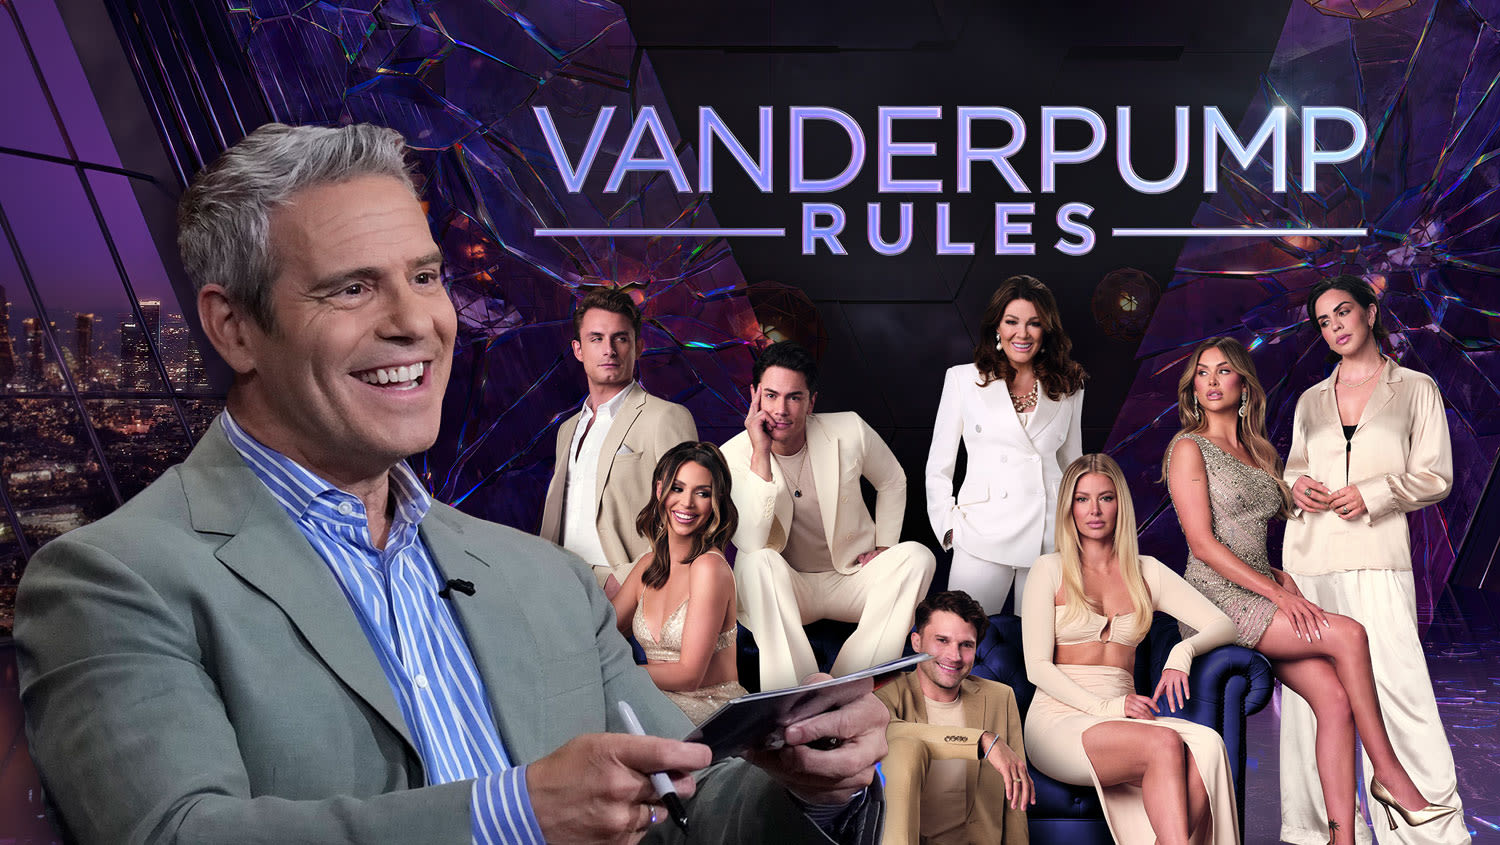 Andy Cohen On Why ‘Vanderpump Rules’ Taking An Extended Hiatus After Season 11 Is “A Very Good Idea”